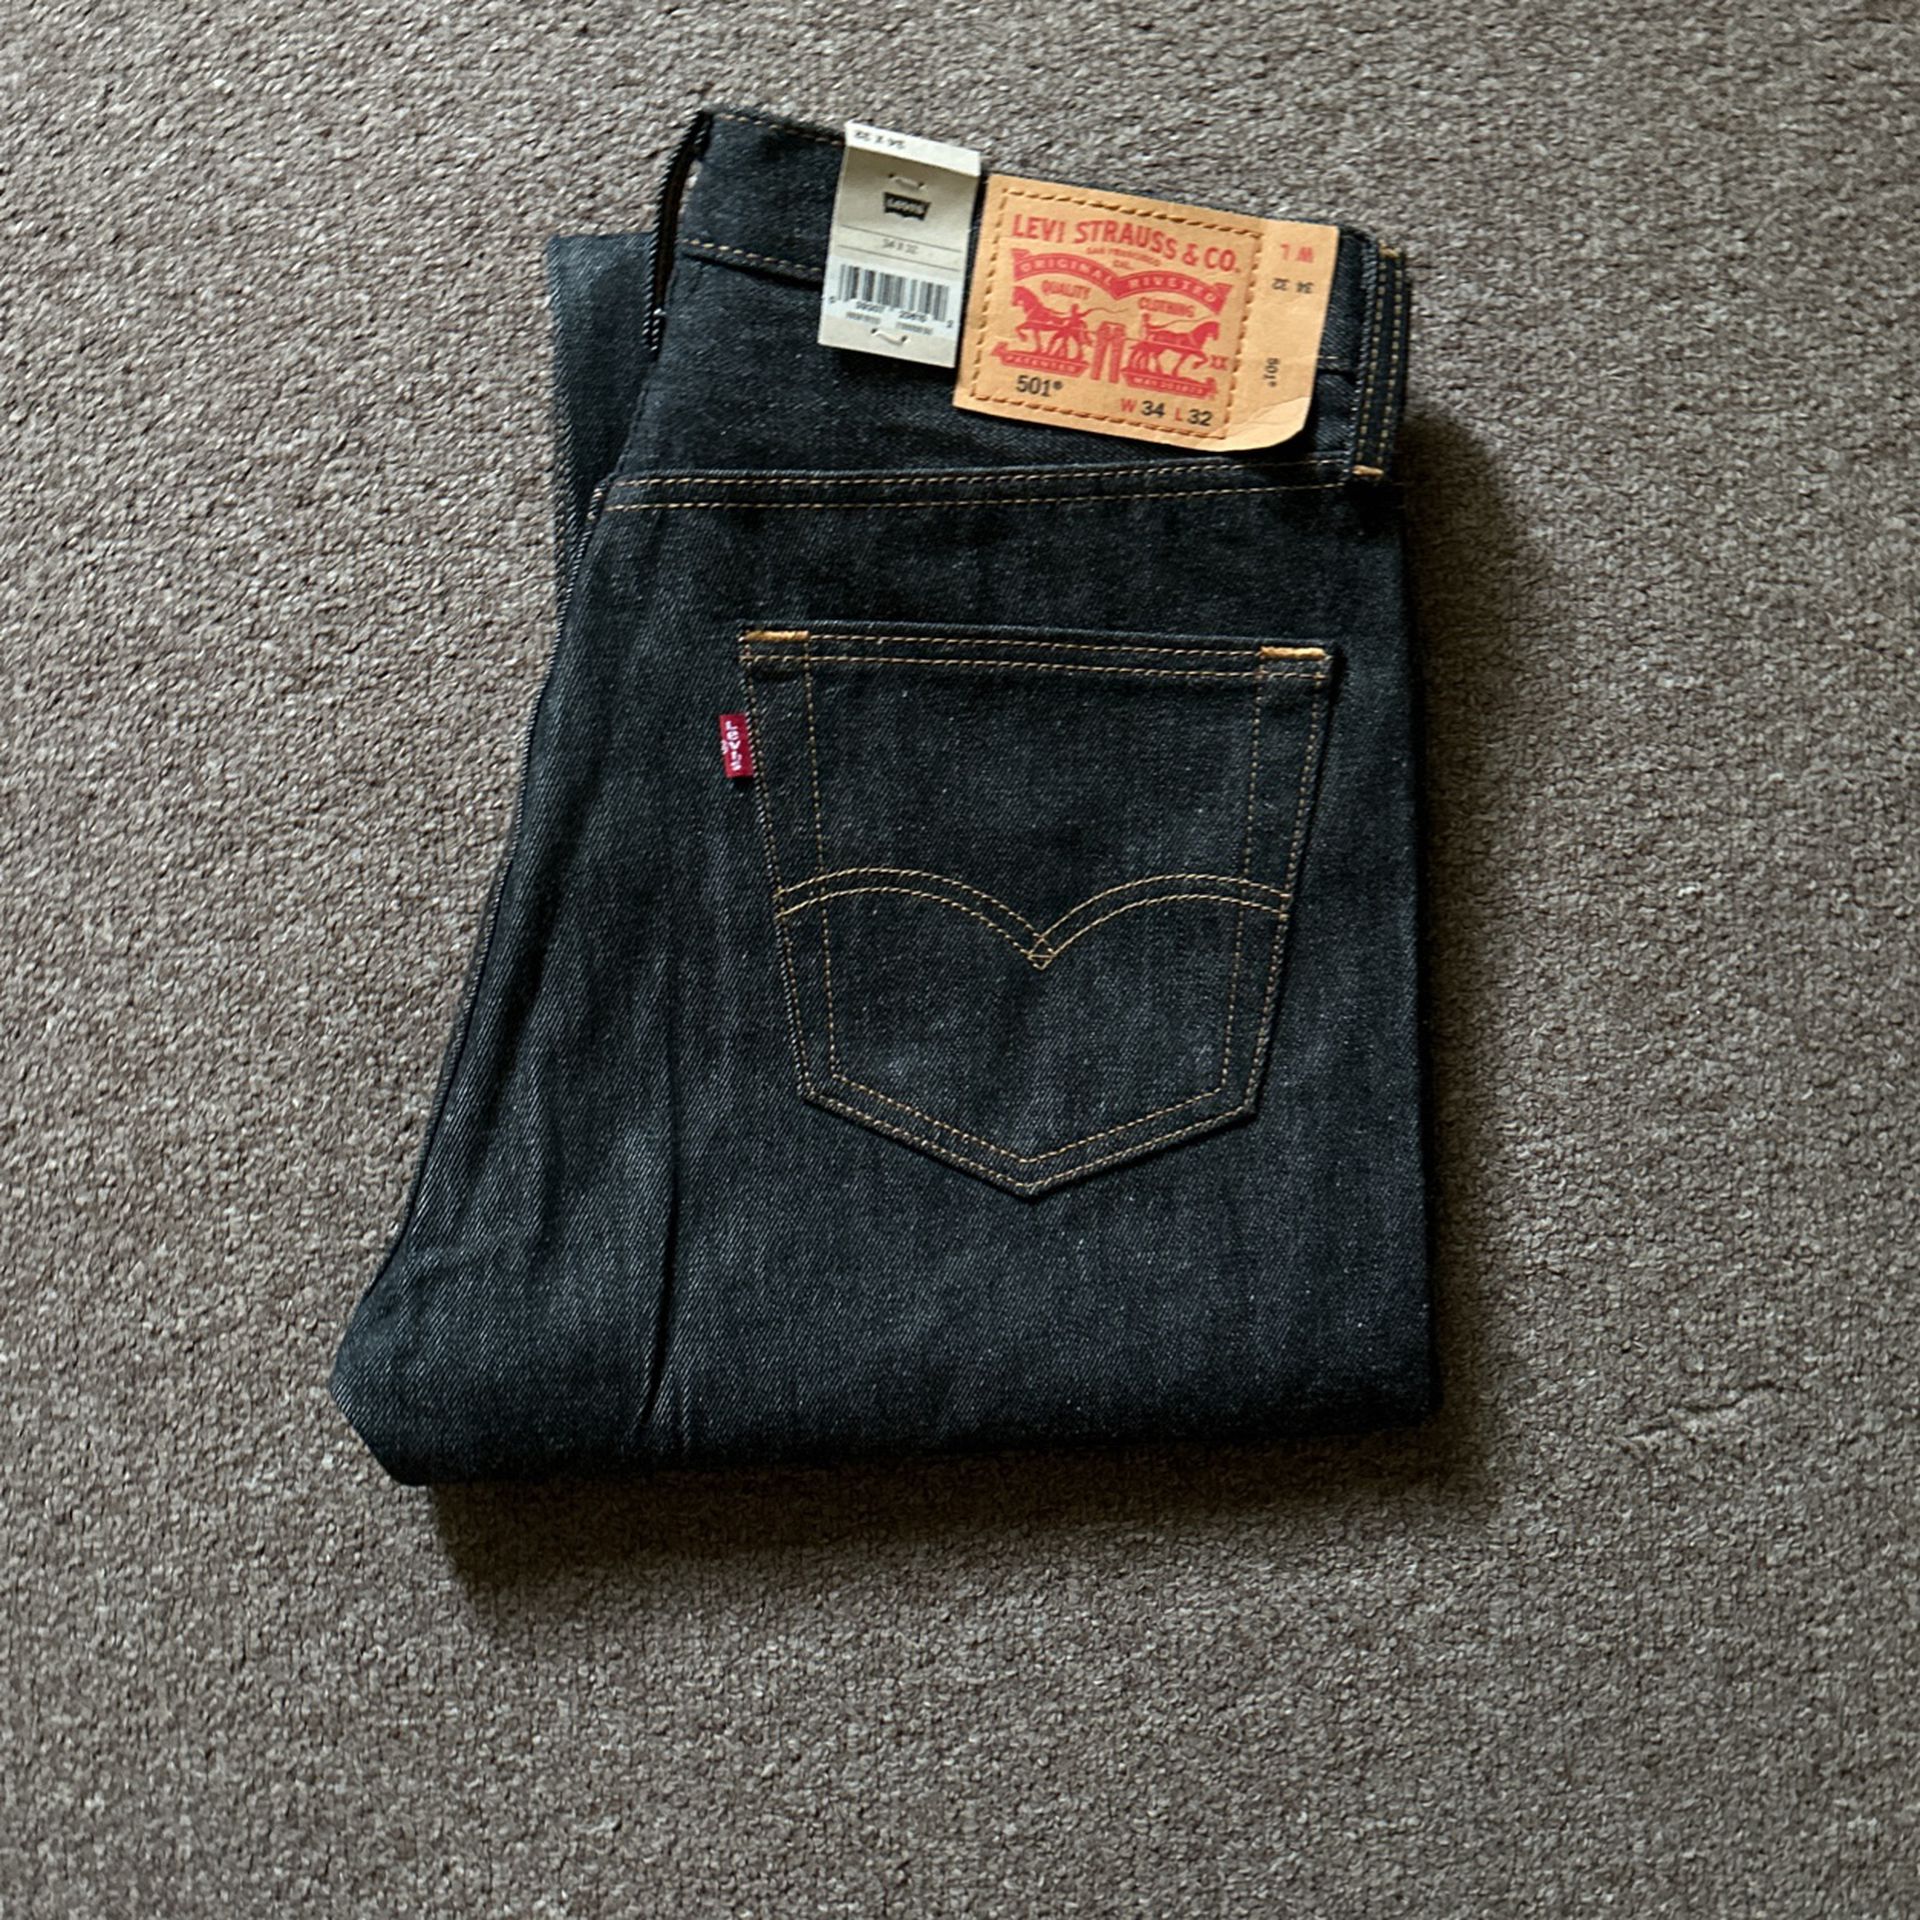 New Levi’s 501 34x32 With Tags